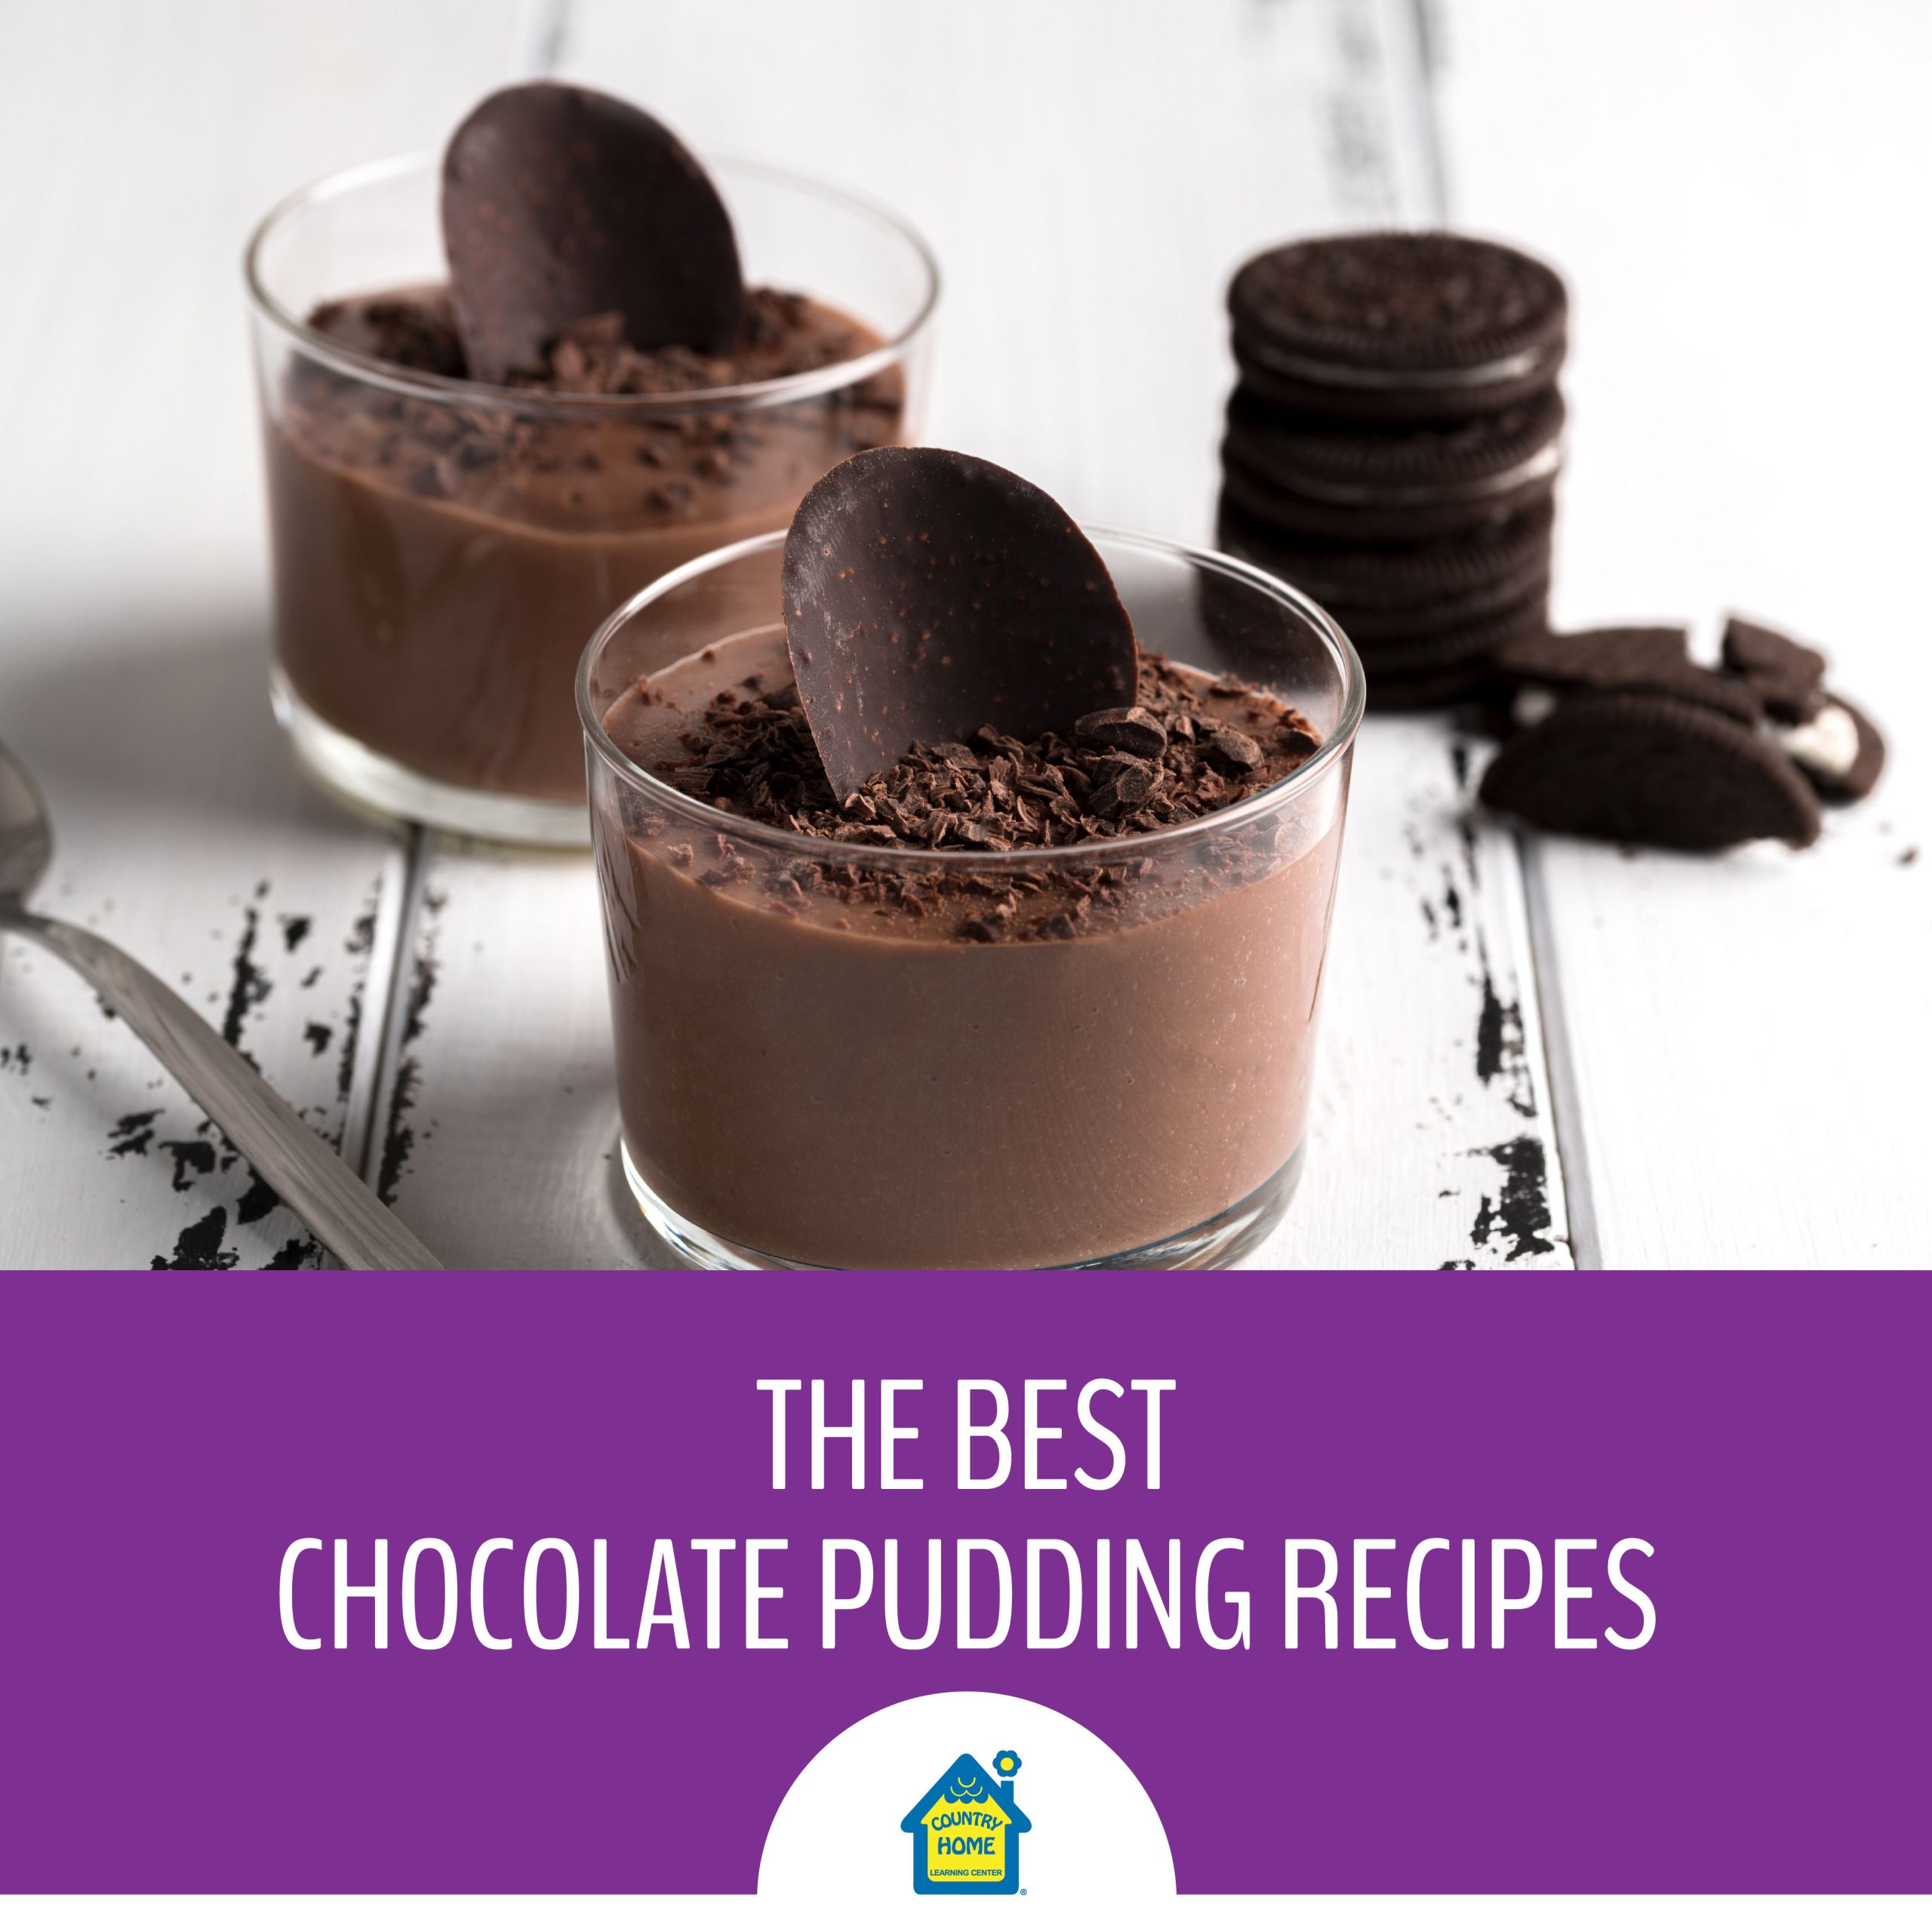 The Best Chocolate Pudding Recipes